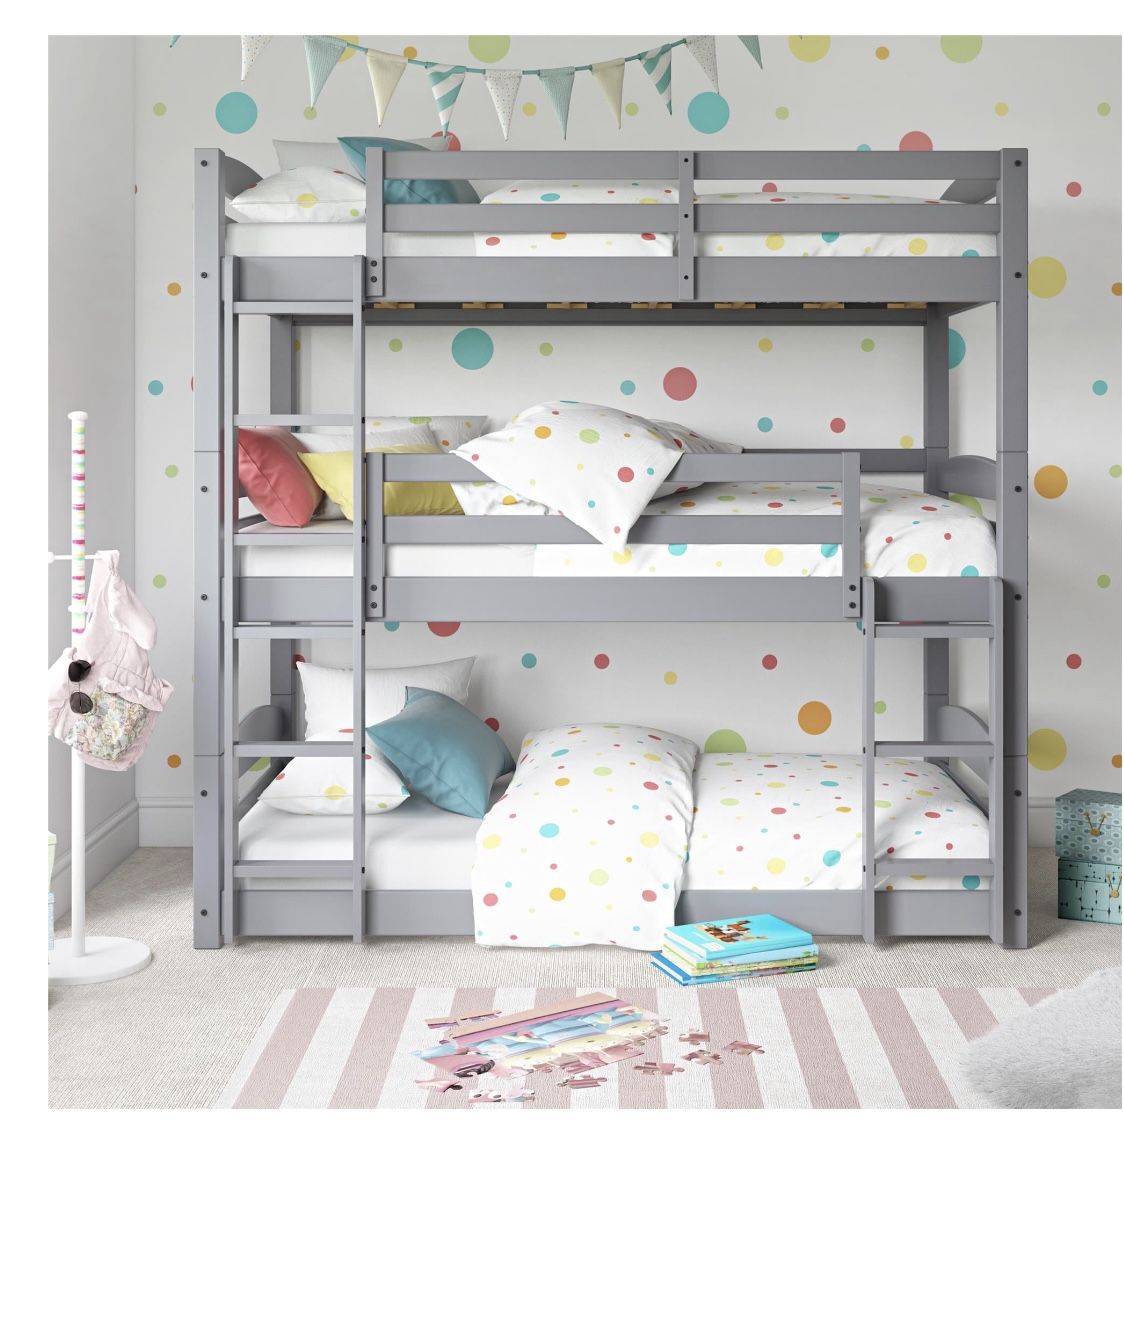 Triple bunk Bed That Can Be Separated